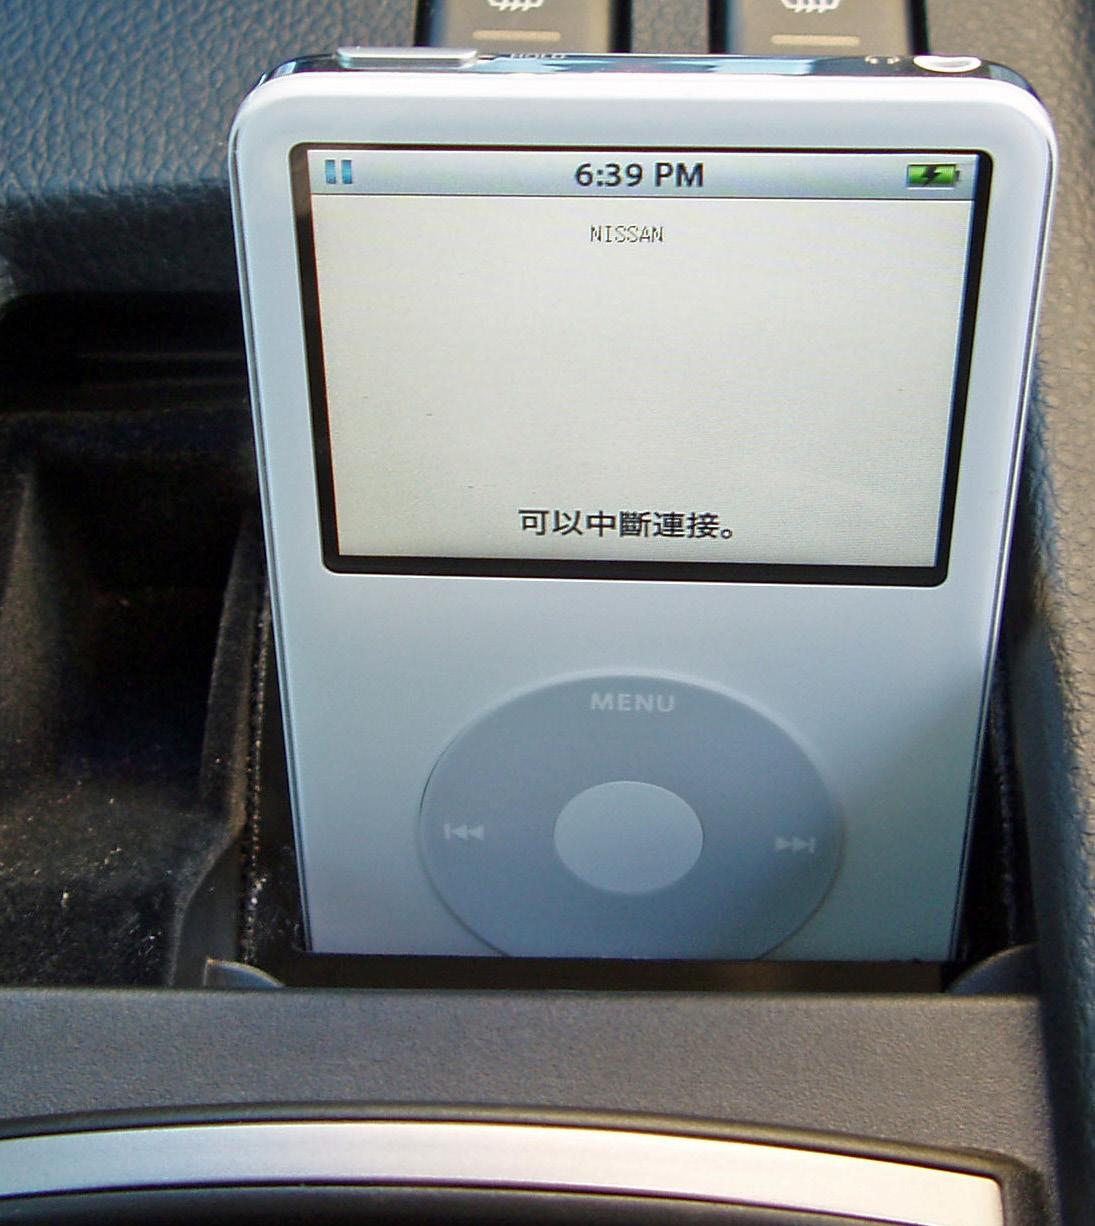 instal the last version for ipod WHAT THE CAR